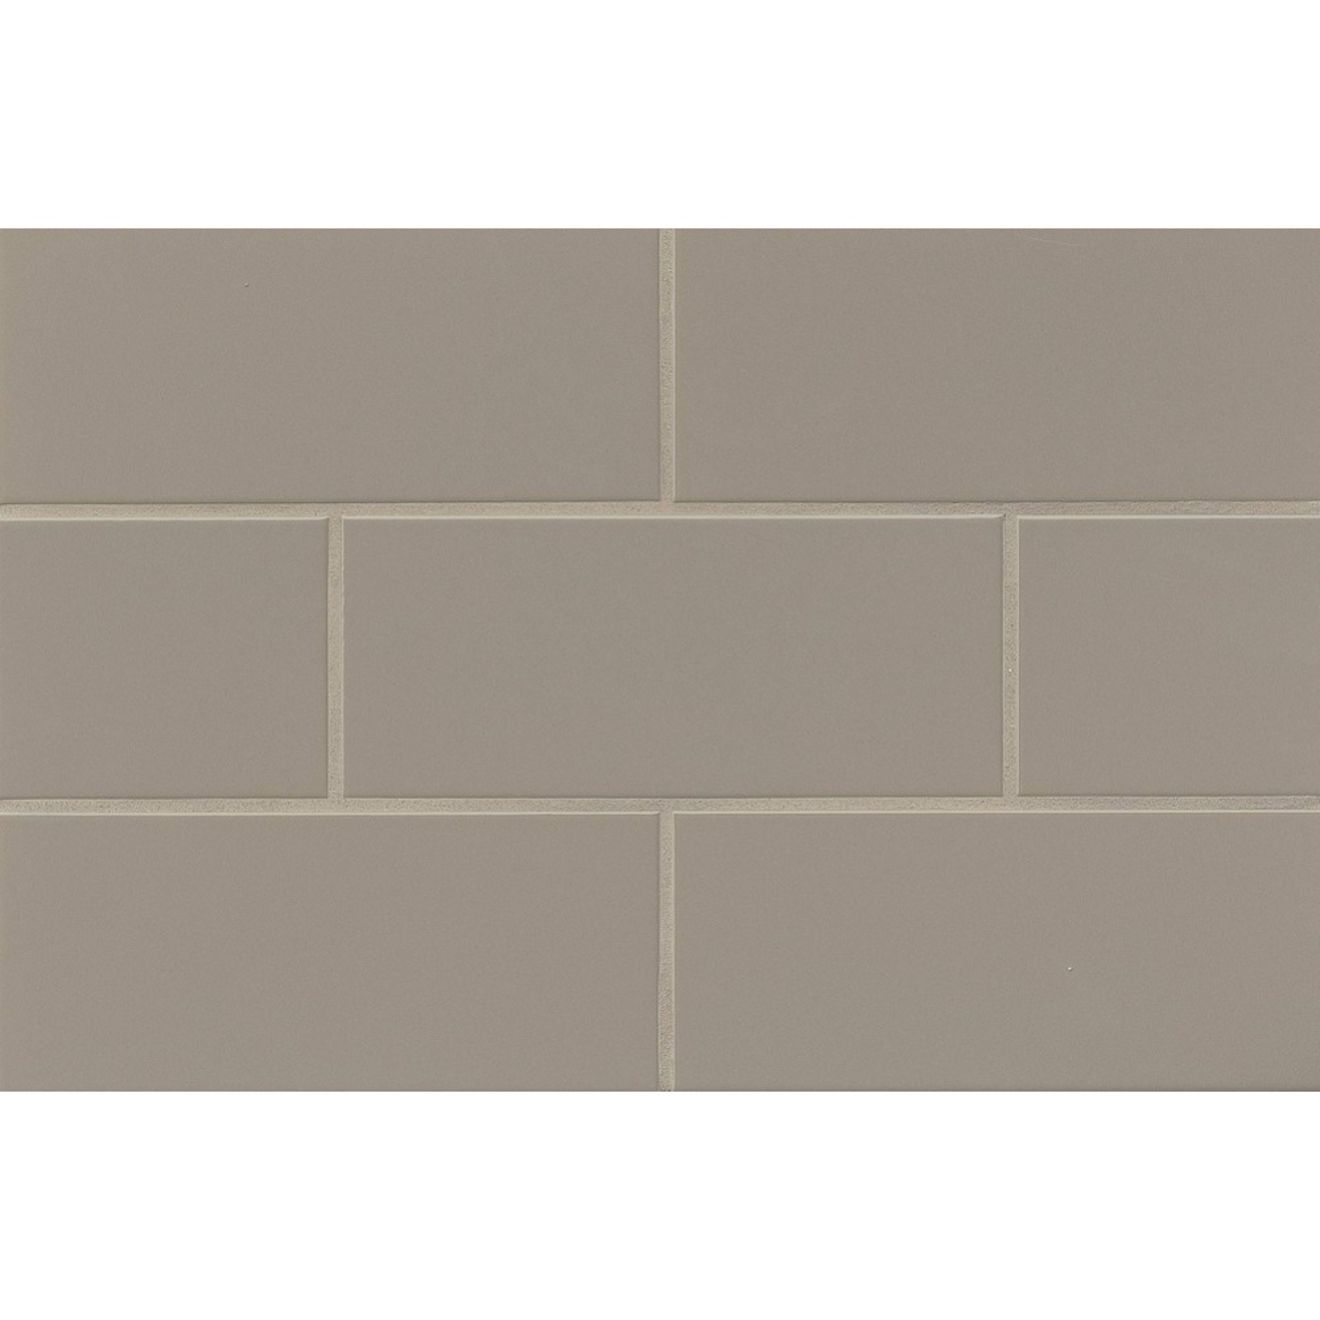 Bedrosians Traditions 4.25" x 10" Ceramic Tile Taupe Matte